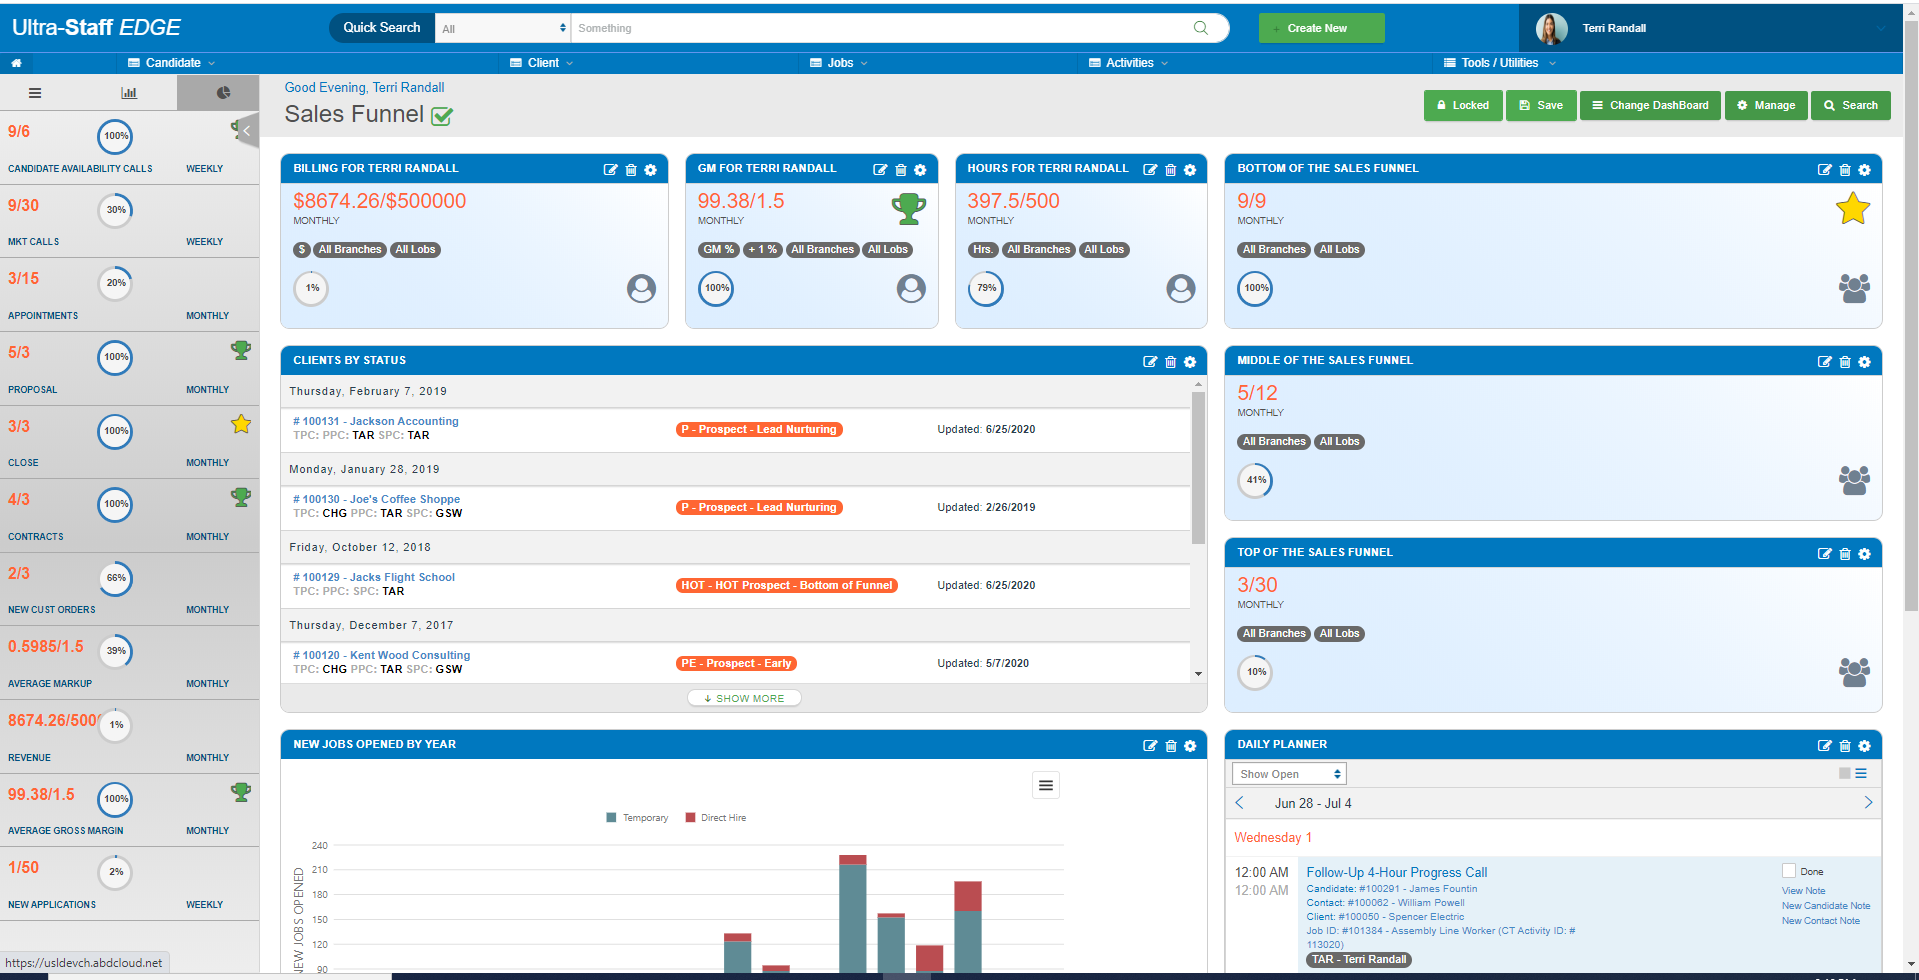 A Sales Dashboard in Ultra-Staff EDGE. Each sales person can customize their dashboard to keep track of key metrics and help them stay on top of daily, weekly, and monthly goals.